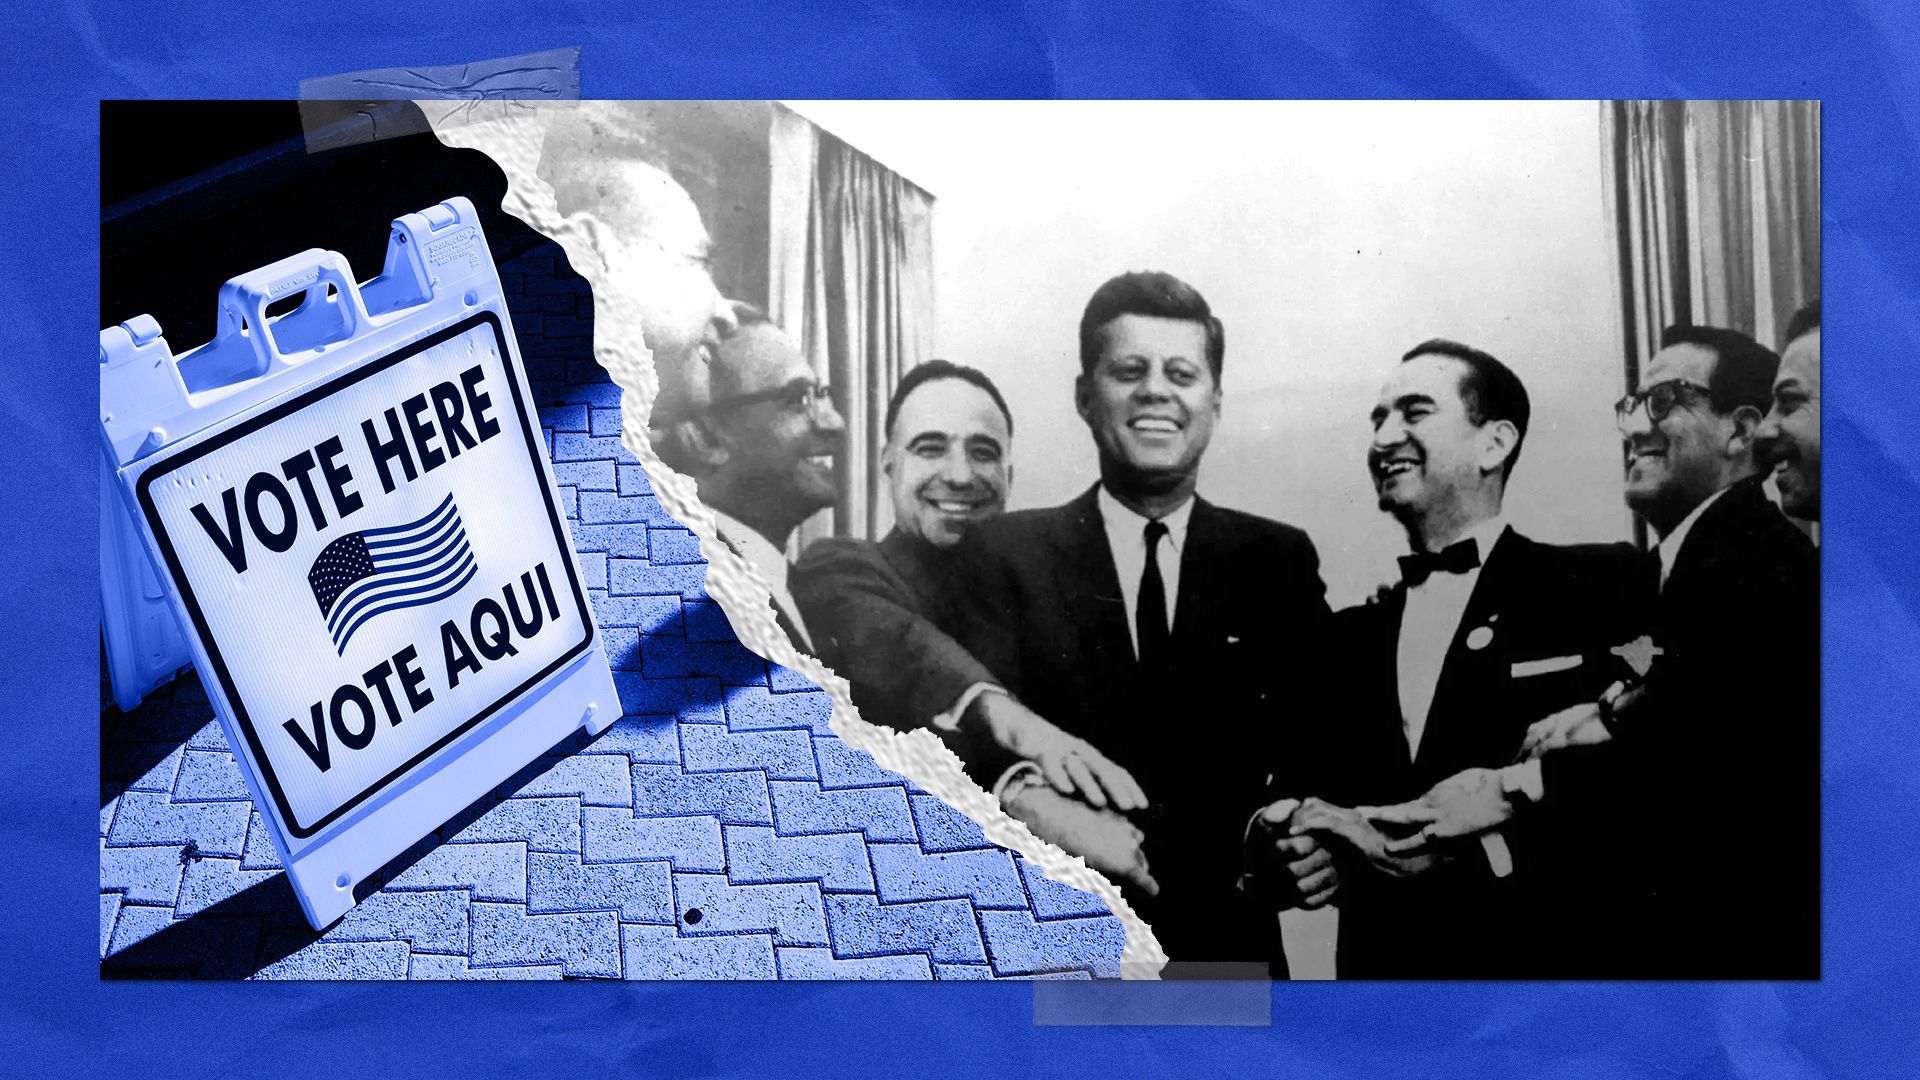 Photo illustration of a "Vote Here" sign translated into Spanish and candidate John F. Kennedy with members of the Viva Kennedy leaders in 1960. 